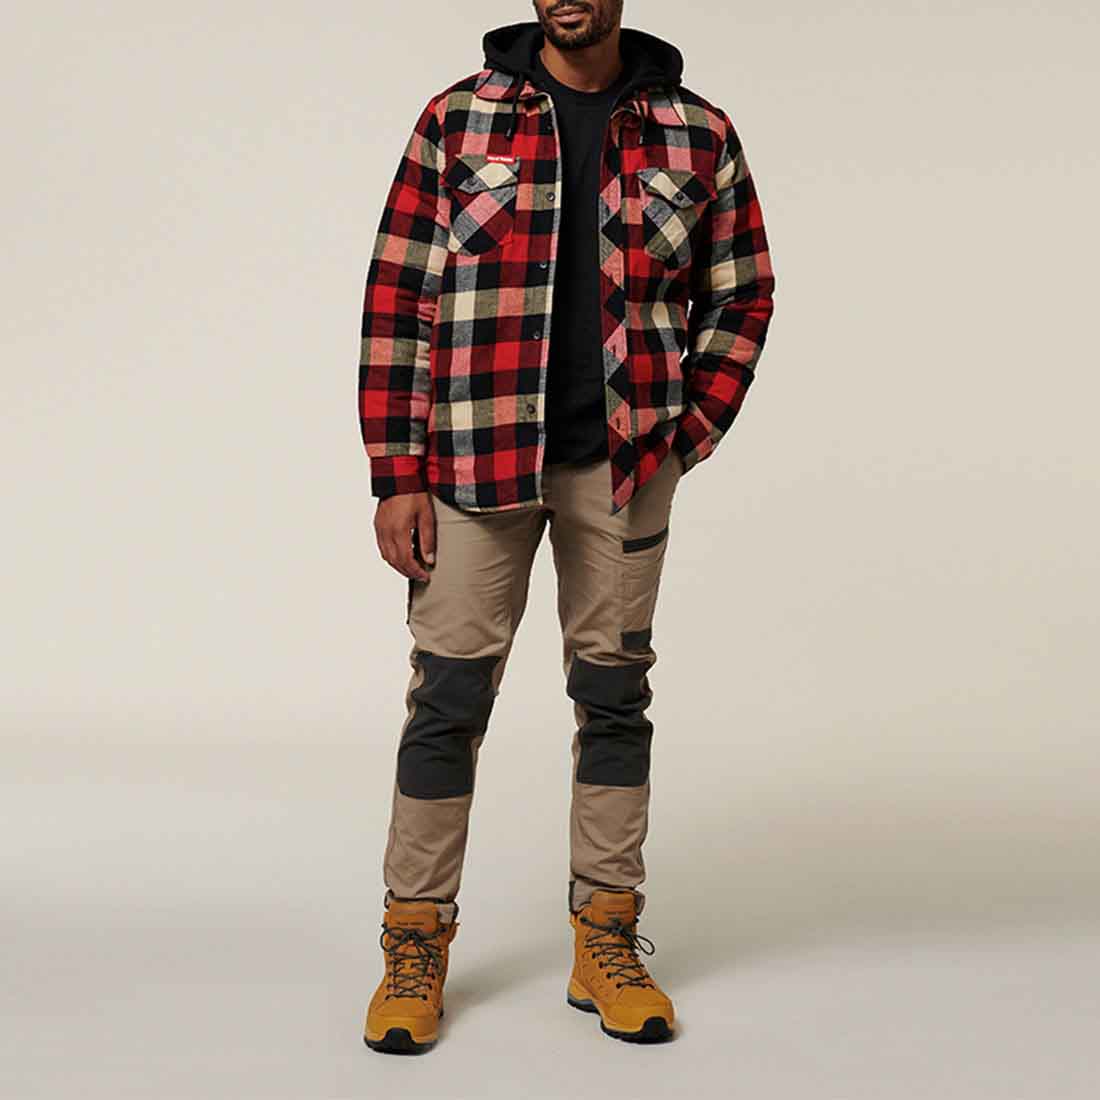 Hard Yakka Red Quilted Shacket | Men's Red Checked Shirts & Jackets